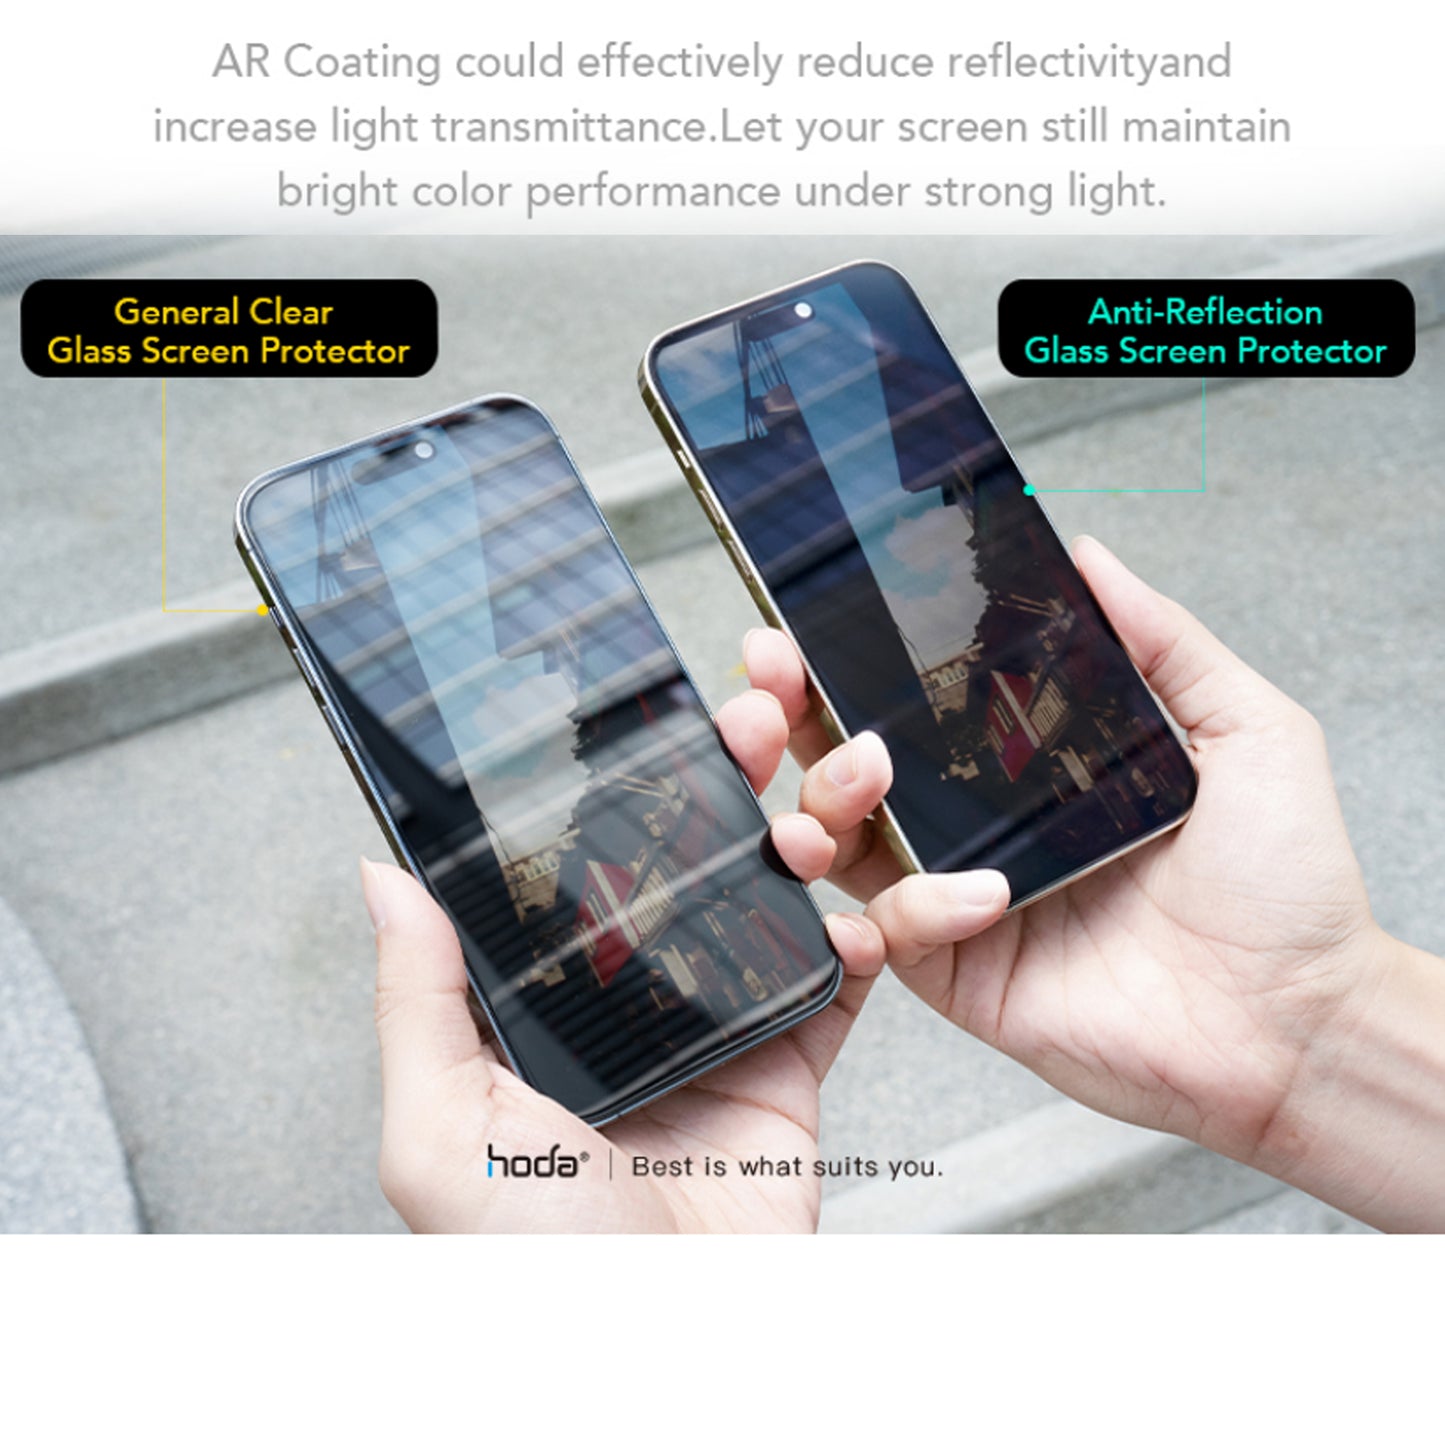 Hoda Anti-Reflection for iPhone 14 - 13 -13 Pro - with Dust Free Helper - Full Coverage Tempered Glass Screen Protector ( Barcode: 4711103546222 )